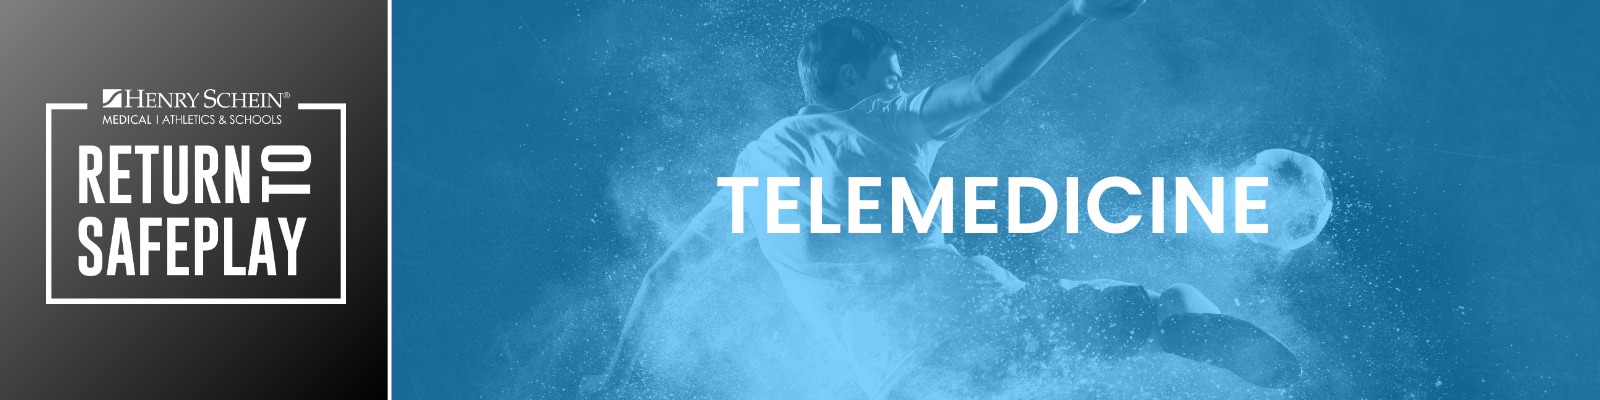 Telemedicine for Athletic Trainers - Henry Schein Medical